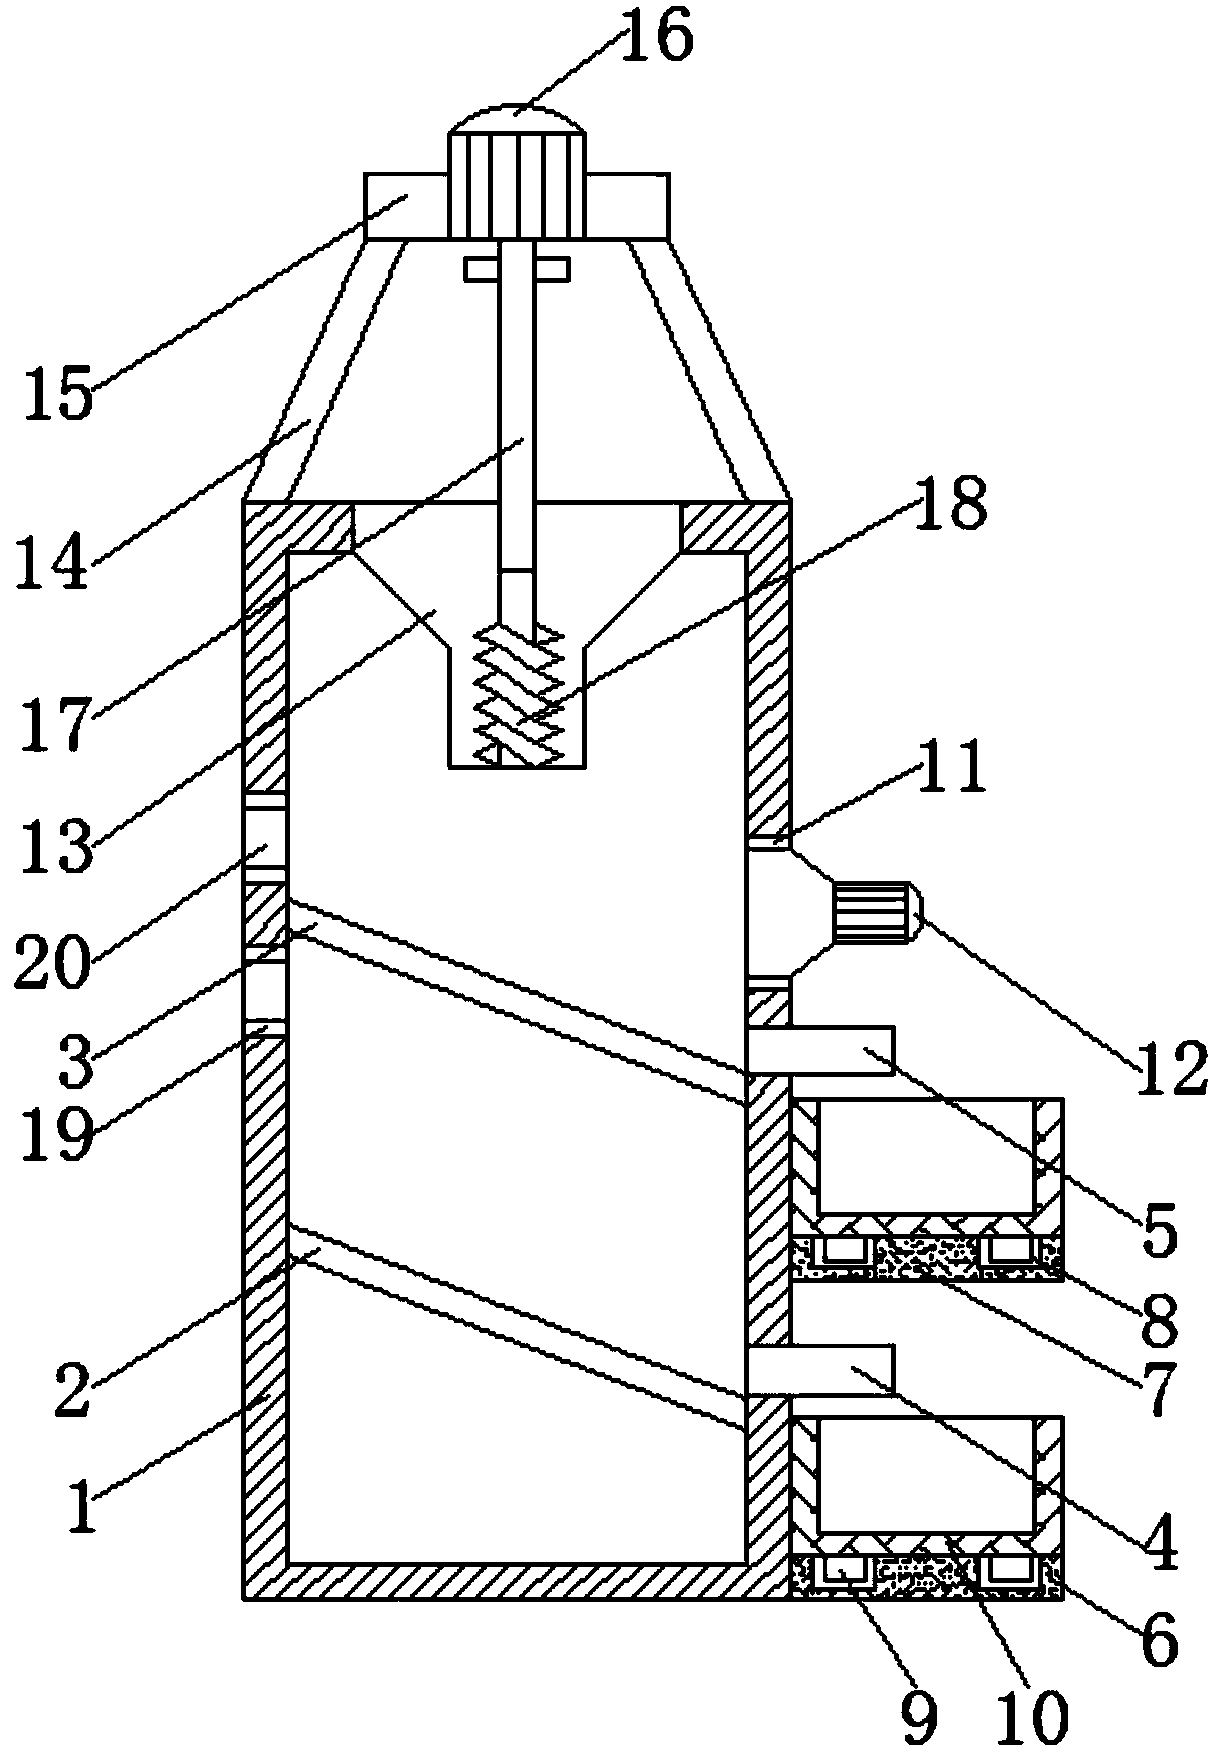 Non-ferrous alloy crushing device with good separation effects